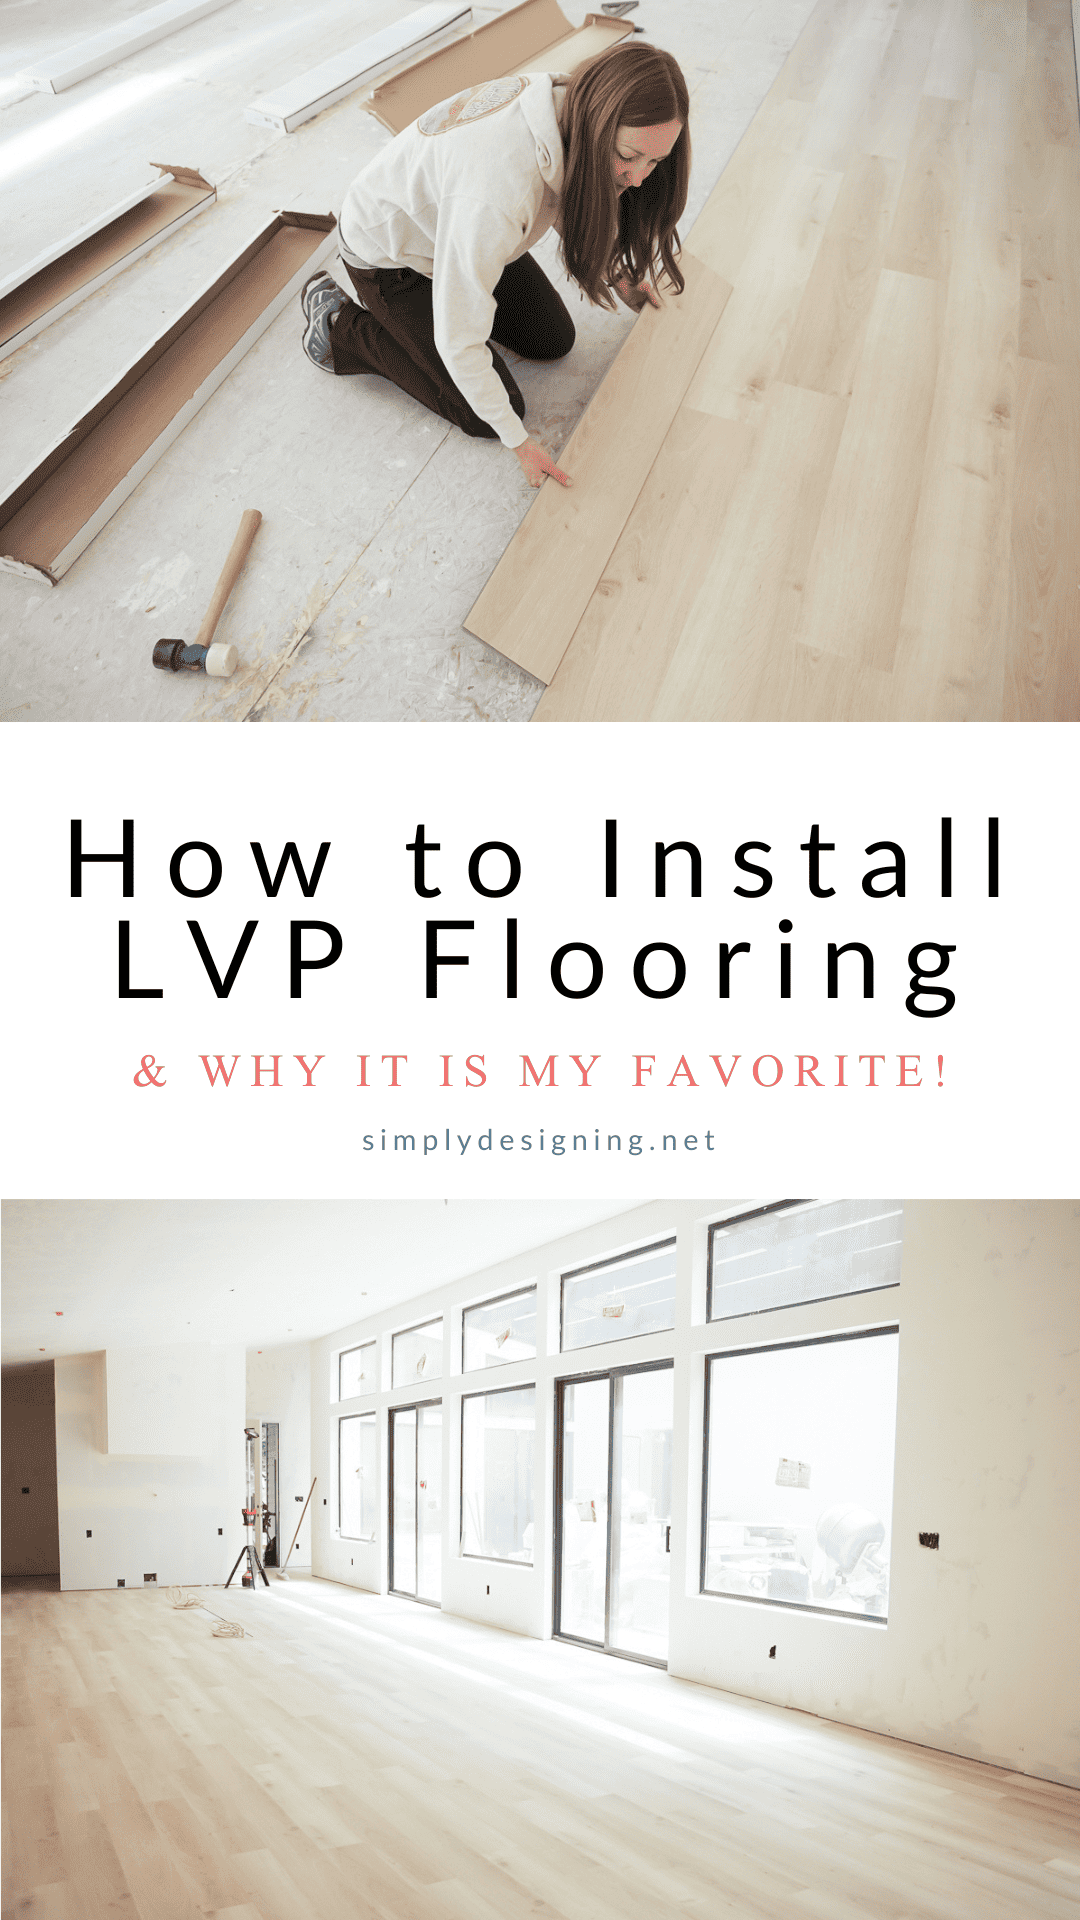 How to Install LVP Flooring and why it is my favorite for a family